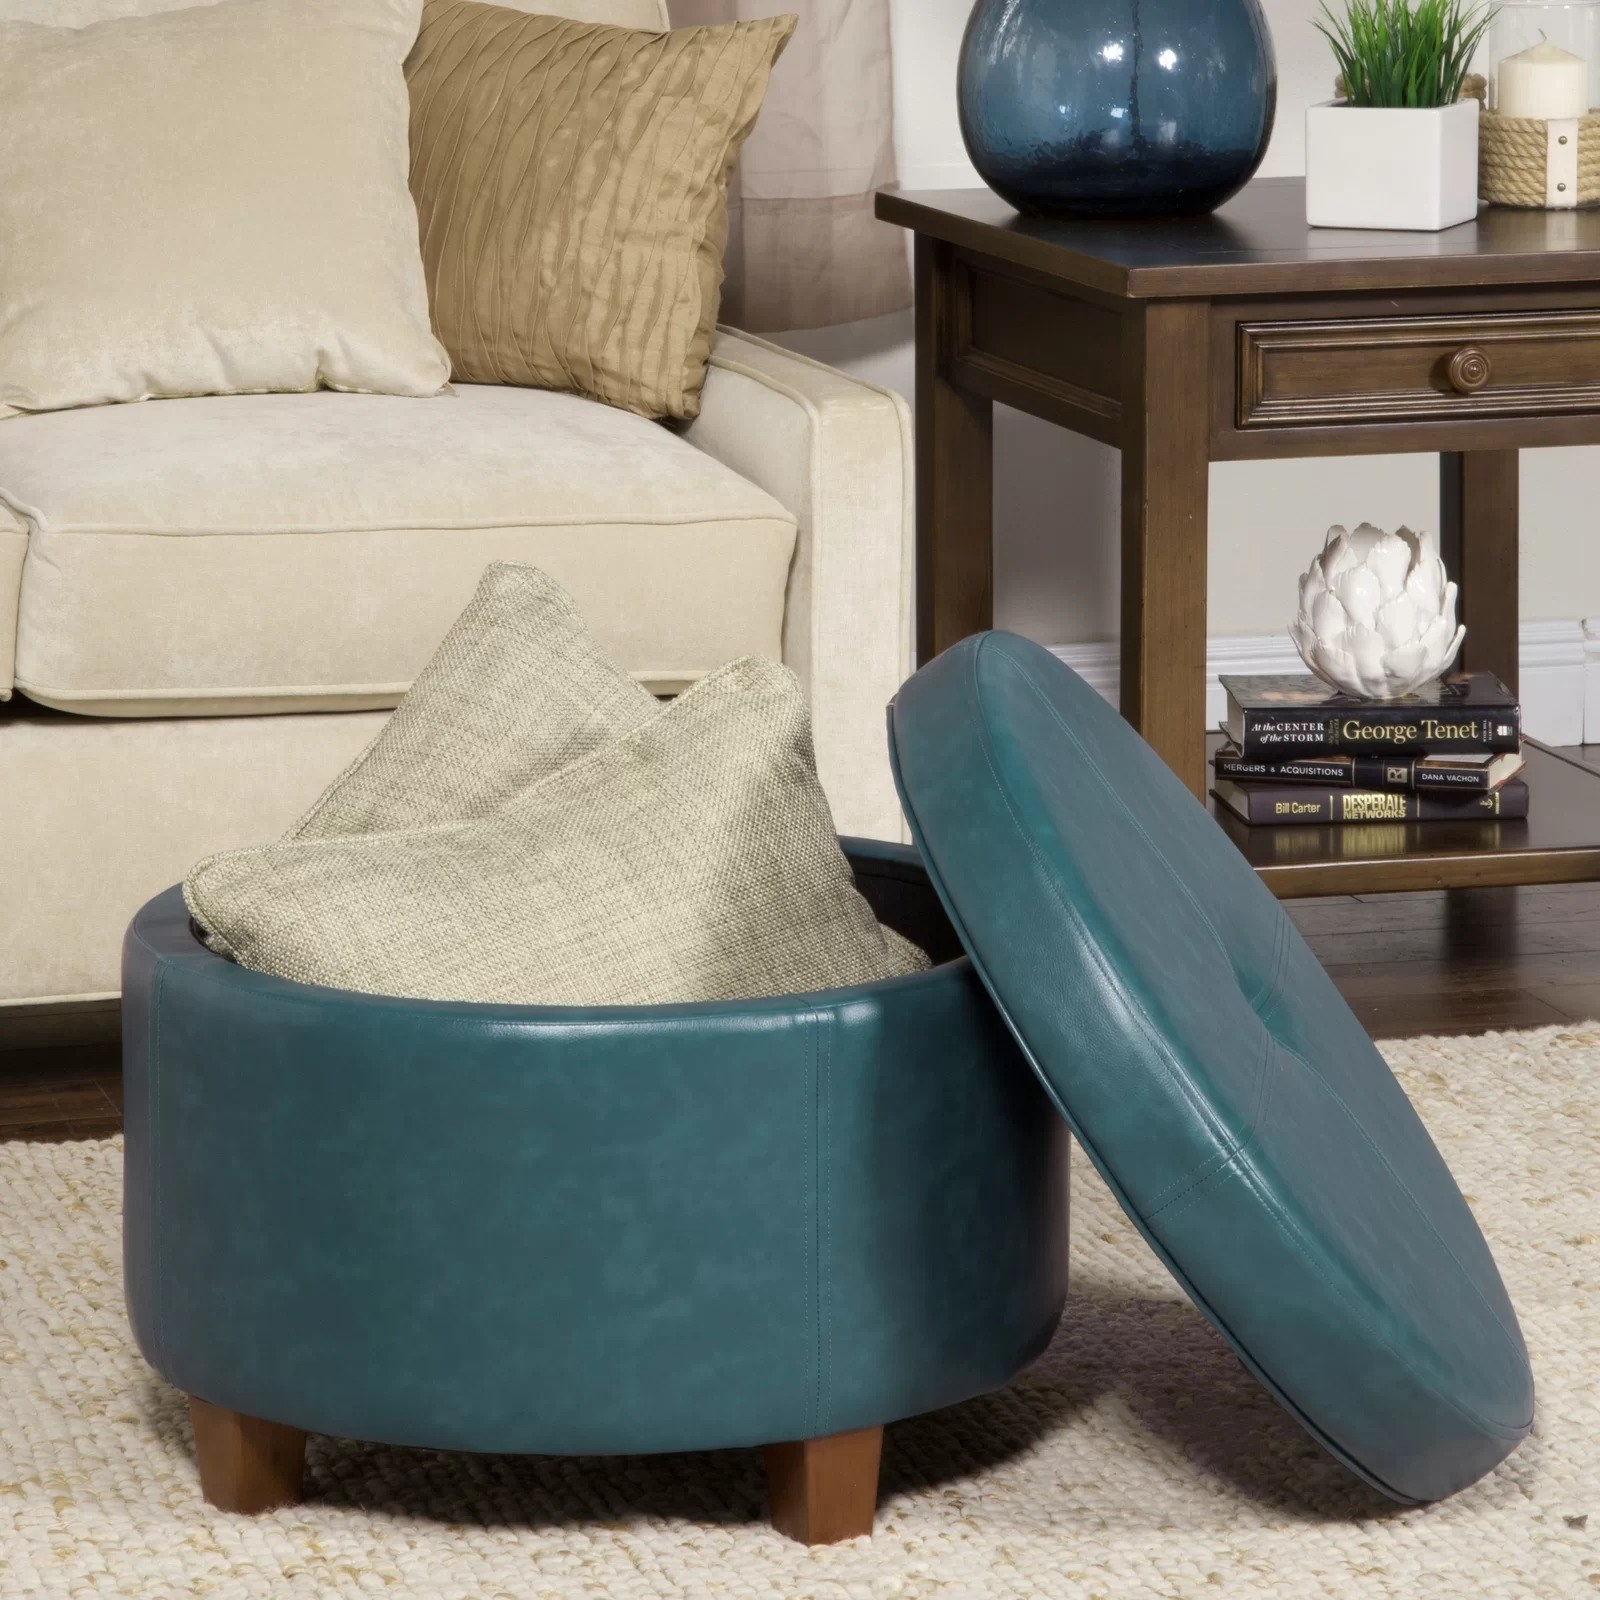 Teal faux leather storage ottoman on a carpet in a living room